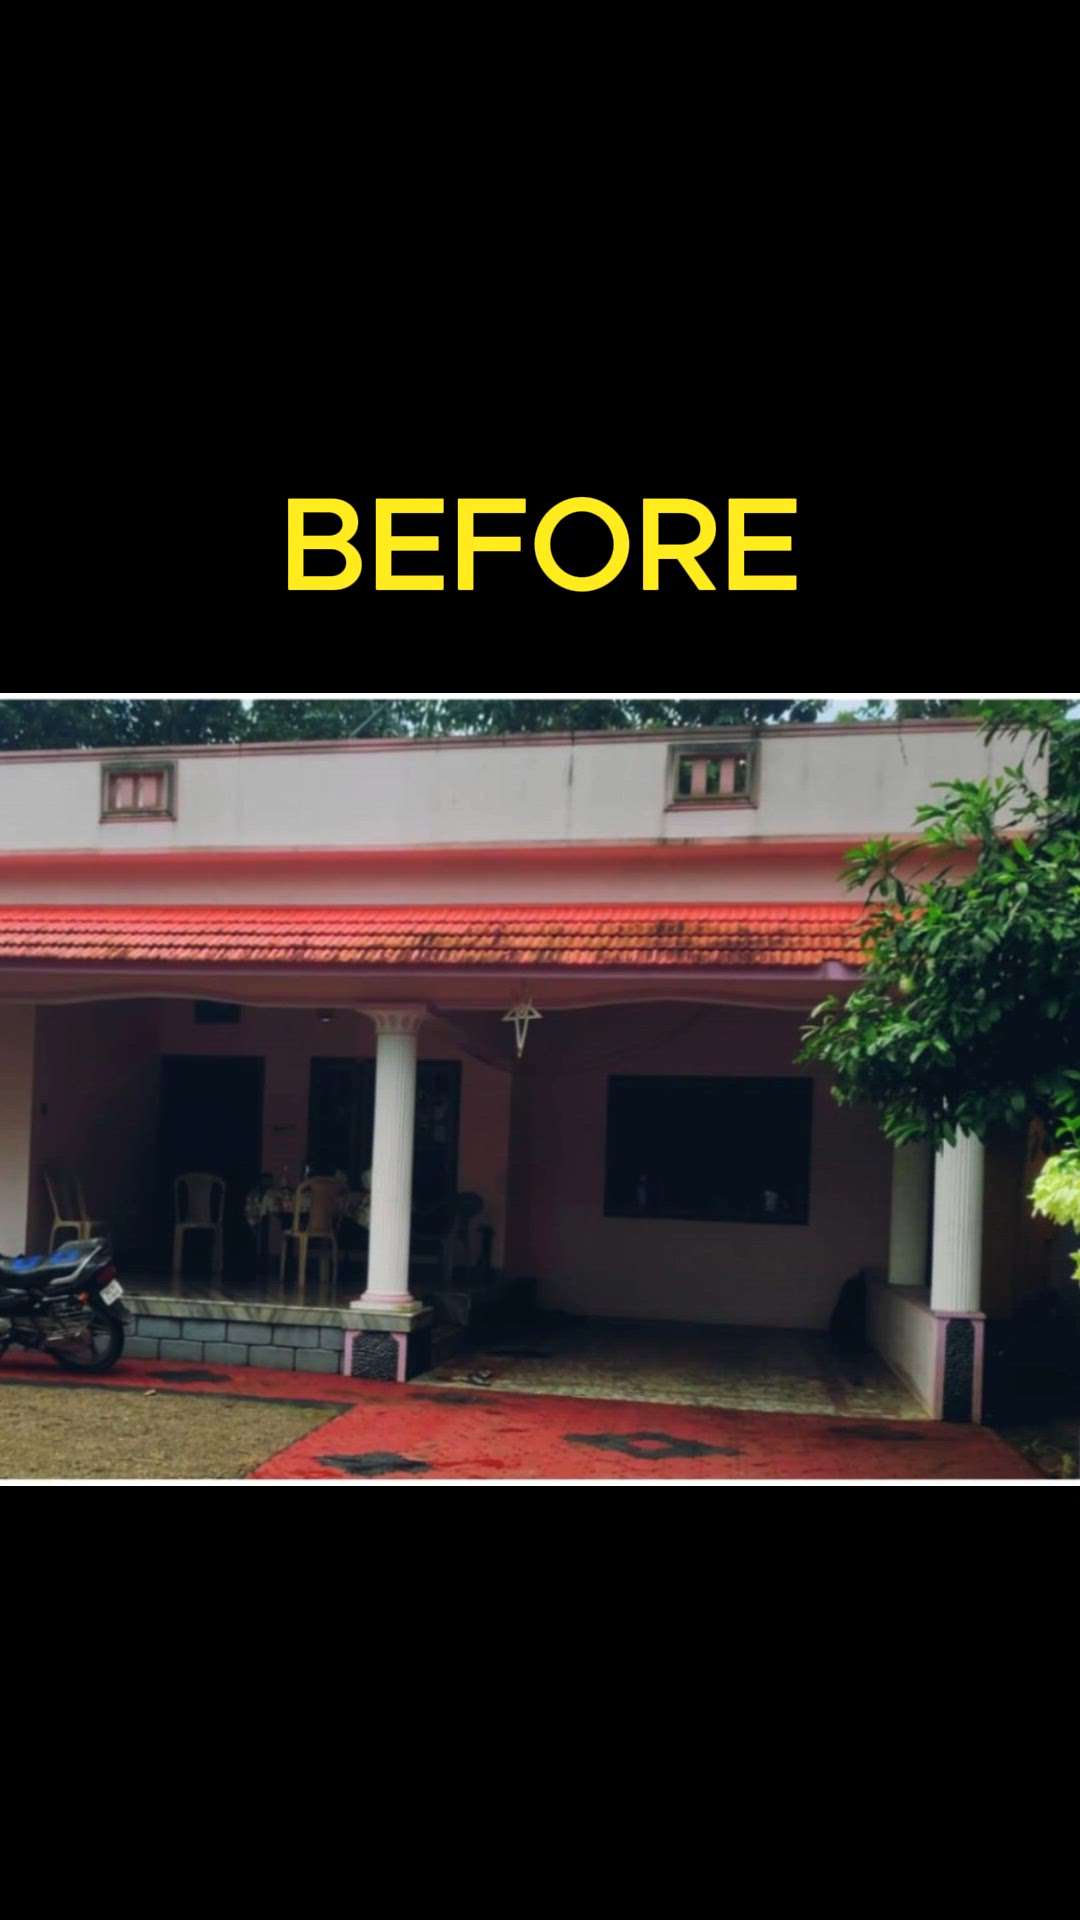 #HouseRenovation #Best_designers #lowbudget #ProposedColonialStyle #changeover #MAKEOVER #Architect #besthome   #BestBuildersInKerala#ultramodern  #besthome  #bestprice  #modernhouses  #creative  #HouseDesigns  #ElevationHome  #new_home  #Alappuzha  #lowbudgethousekerala  #MixedRoofHouse  #KeralaStyleHouse  #keralaart  #newhomeconstruction#patio  #patiodecor  #lowbudget #lowbudgethousekerala  #bestprice  #Best_designers #BestBuildersInKerala #creative  #newhomeconstruction #innovative #LandscapeIdeas  #moderndesign#ultramodern  #besthome  #bestprice  #modernhouses  #creative  #HouseDesigns  #ElevationHome  #new_home  #Alappuzha  #lowbudgethousekerala  #MixedRoofHouse  #KeralaStyleHouse  #keralaart  #newhomeconstruction#lowbudgethousekerala #Kalamassery #bestinteriordesign  #besthome  #naturelove  #modernhome #HouseRenovation #creative#HouseRenovation  #Renovationwork  #SmallBudgetRenovation  #Best_designers  #best_architect  #lowbudget  #Minimalistic  #ContemporaryHouse  #modernhome  #